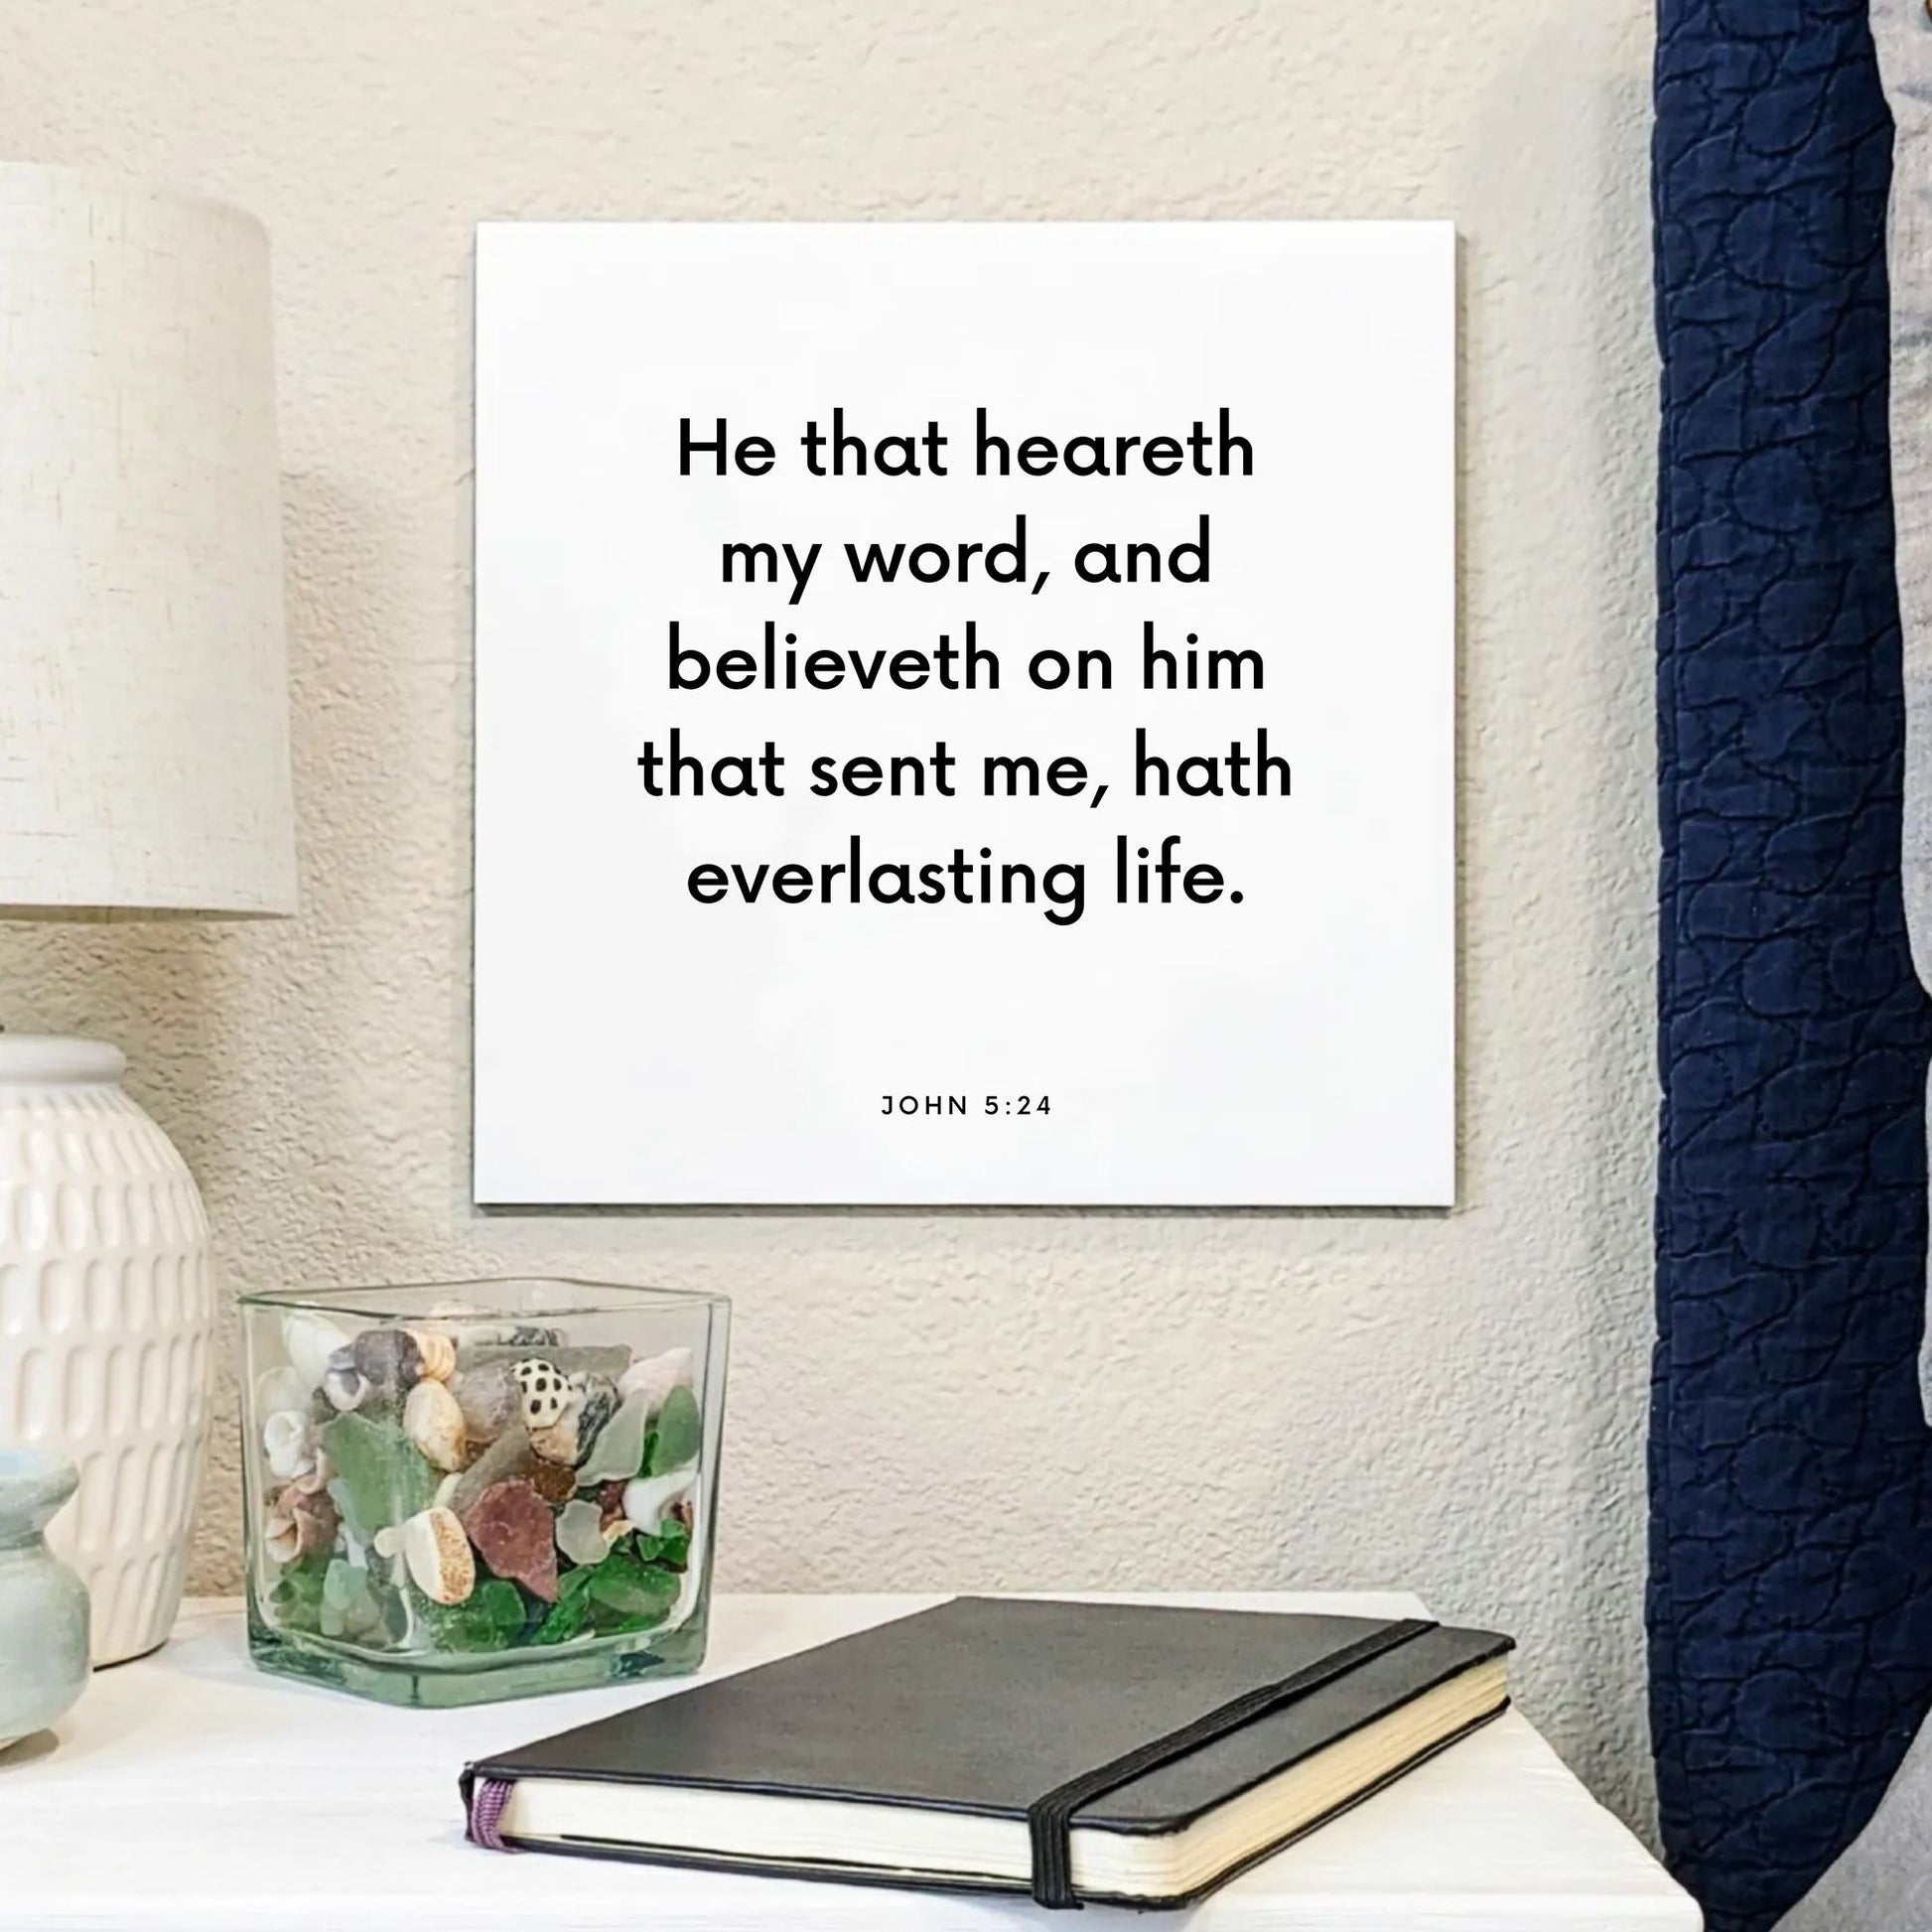 Bedside mouting of the scripture tile for John 5:24 - "He that heareth my word hath everlasting life"